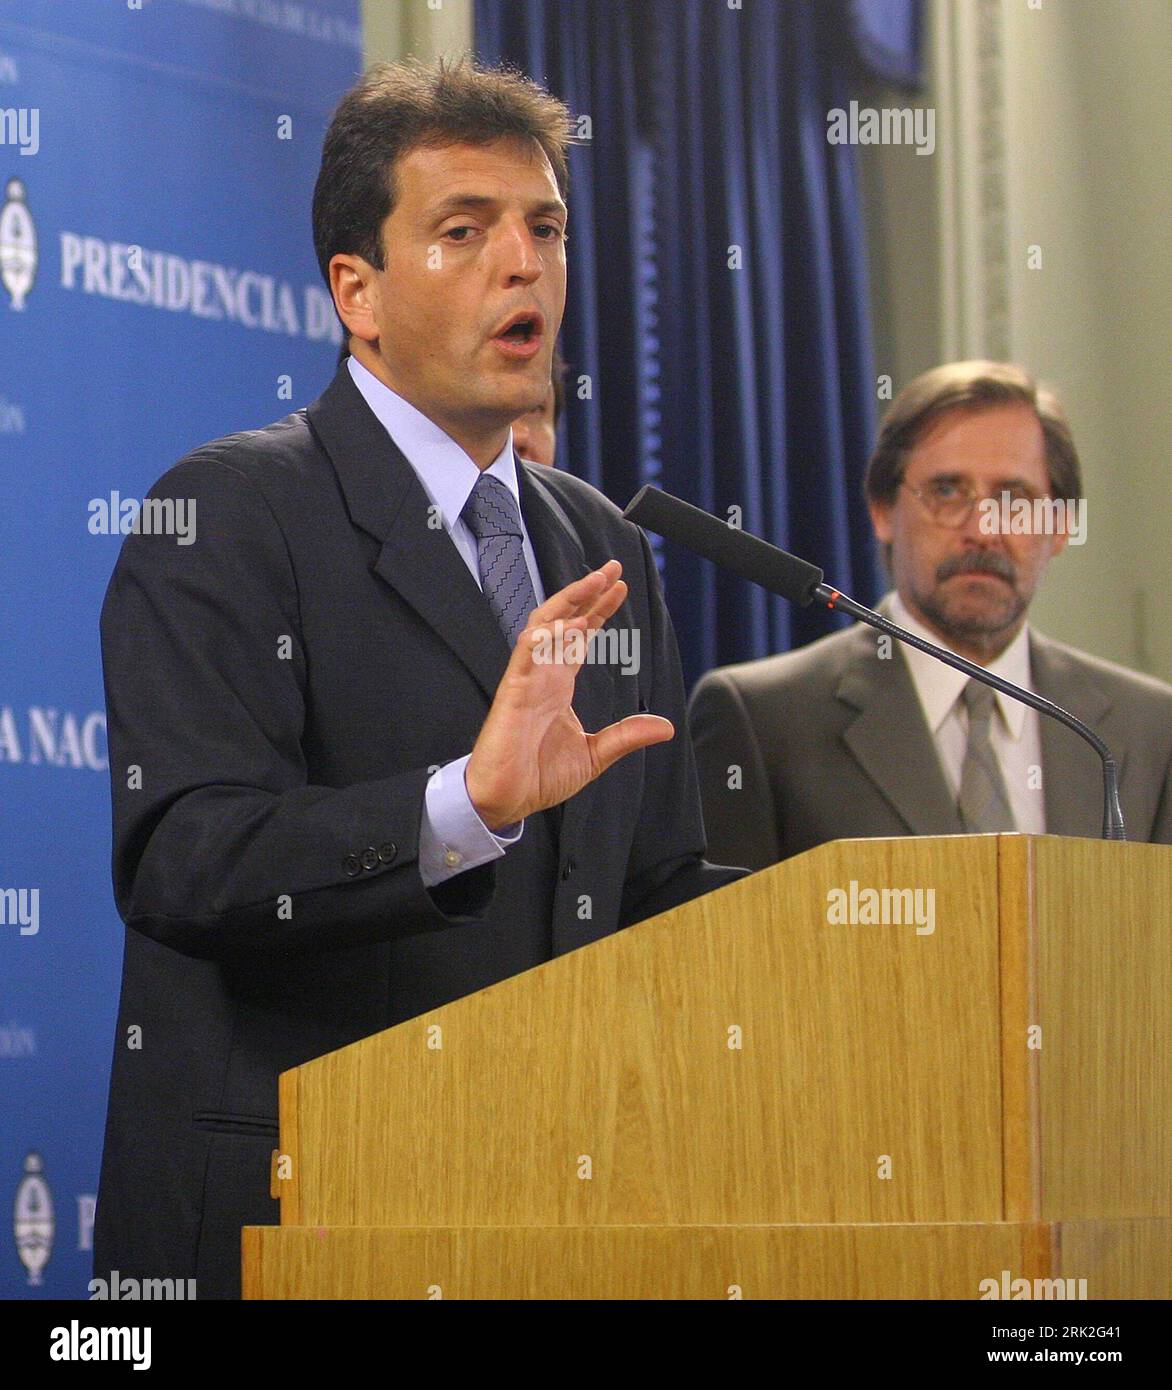 Bildnummer: 53184575  Datum: 07.07.2009  Copyright: imago/Xinhua (090708) -- BUENOS AIRES, July 8, 2009 (Xinhua) -- Undated file photo shows Argentine Cabinet Chief Sergio Massa (L). Argentine presidential spokesman Alfredo Scoccimarro announced on July 7, 2009 that President Cristina Fernandez de Kirchner has reshuffled the cabinet, appointing Minister of Justice, Security and Human Rights Anibal Fernandez as cabinet chief, replacing Sergio Massa. (Xinhua/Martin Zabala) (jl) PUBLICATIONxNOTxINxCHN  People Politik premiumd kbdig  xng (090708) -- Buenos AIRES, Juli 8, 2009 (Xinhua) -- undatiert Stock Photo